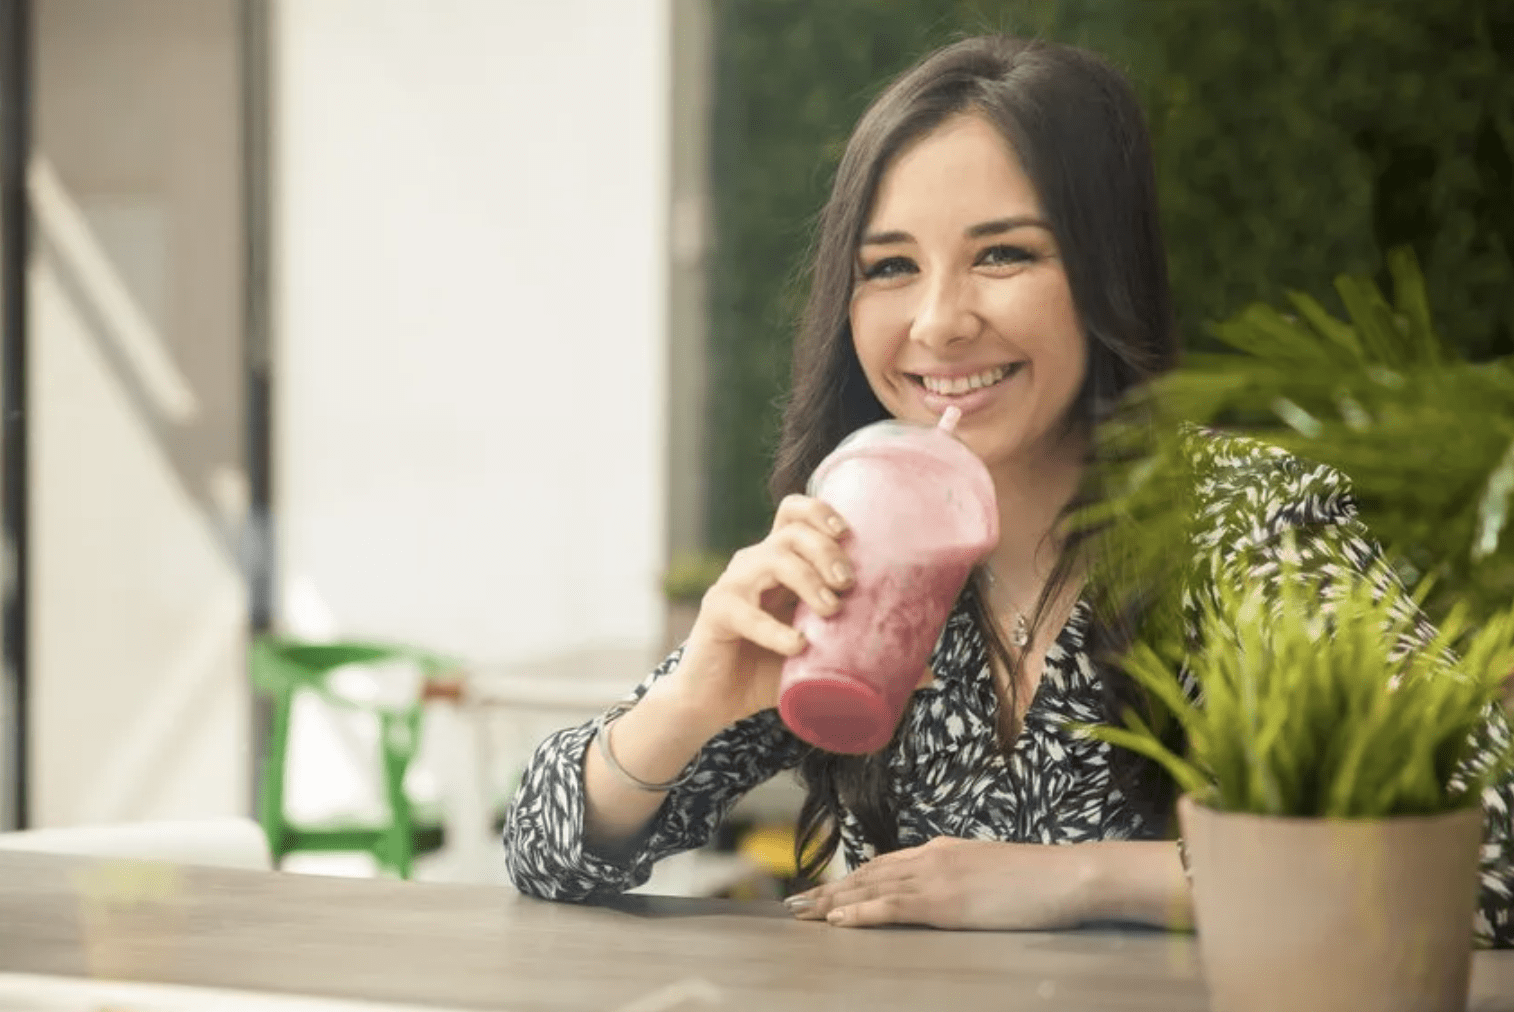 4 Must-Follow Tips to Make Sure Your Juice Bar Recipes Taste Great Each Time